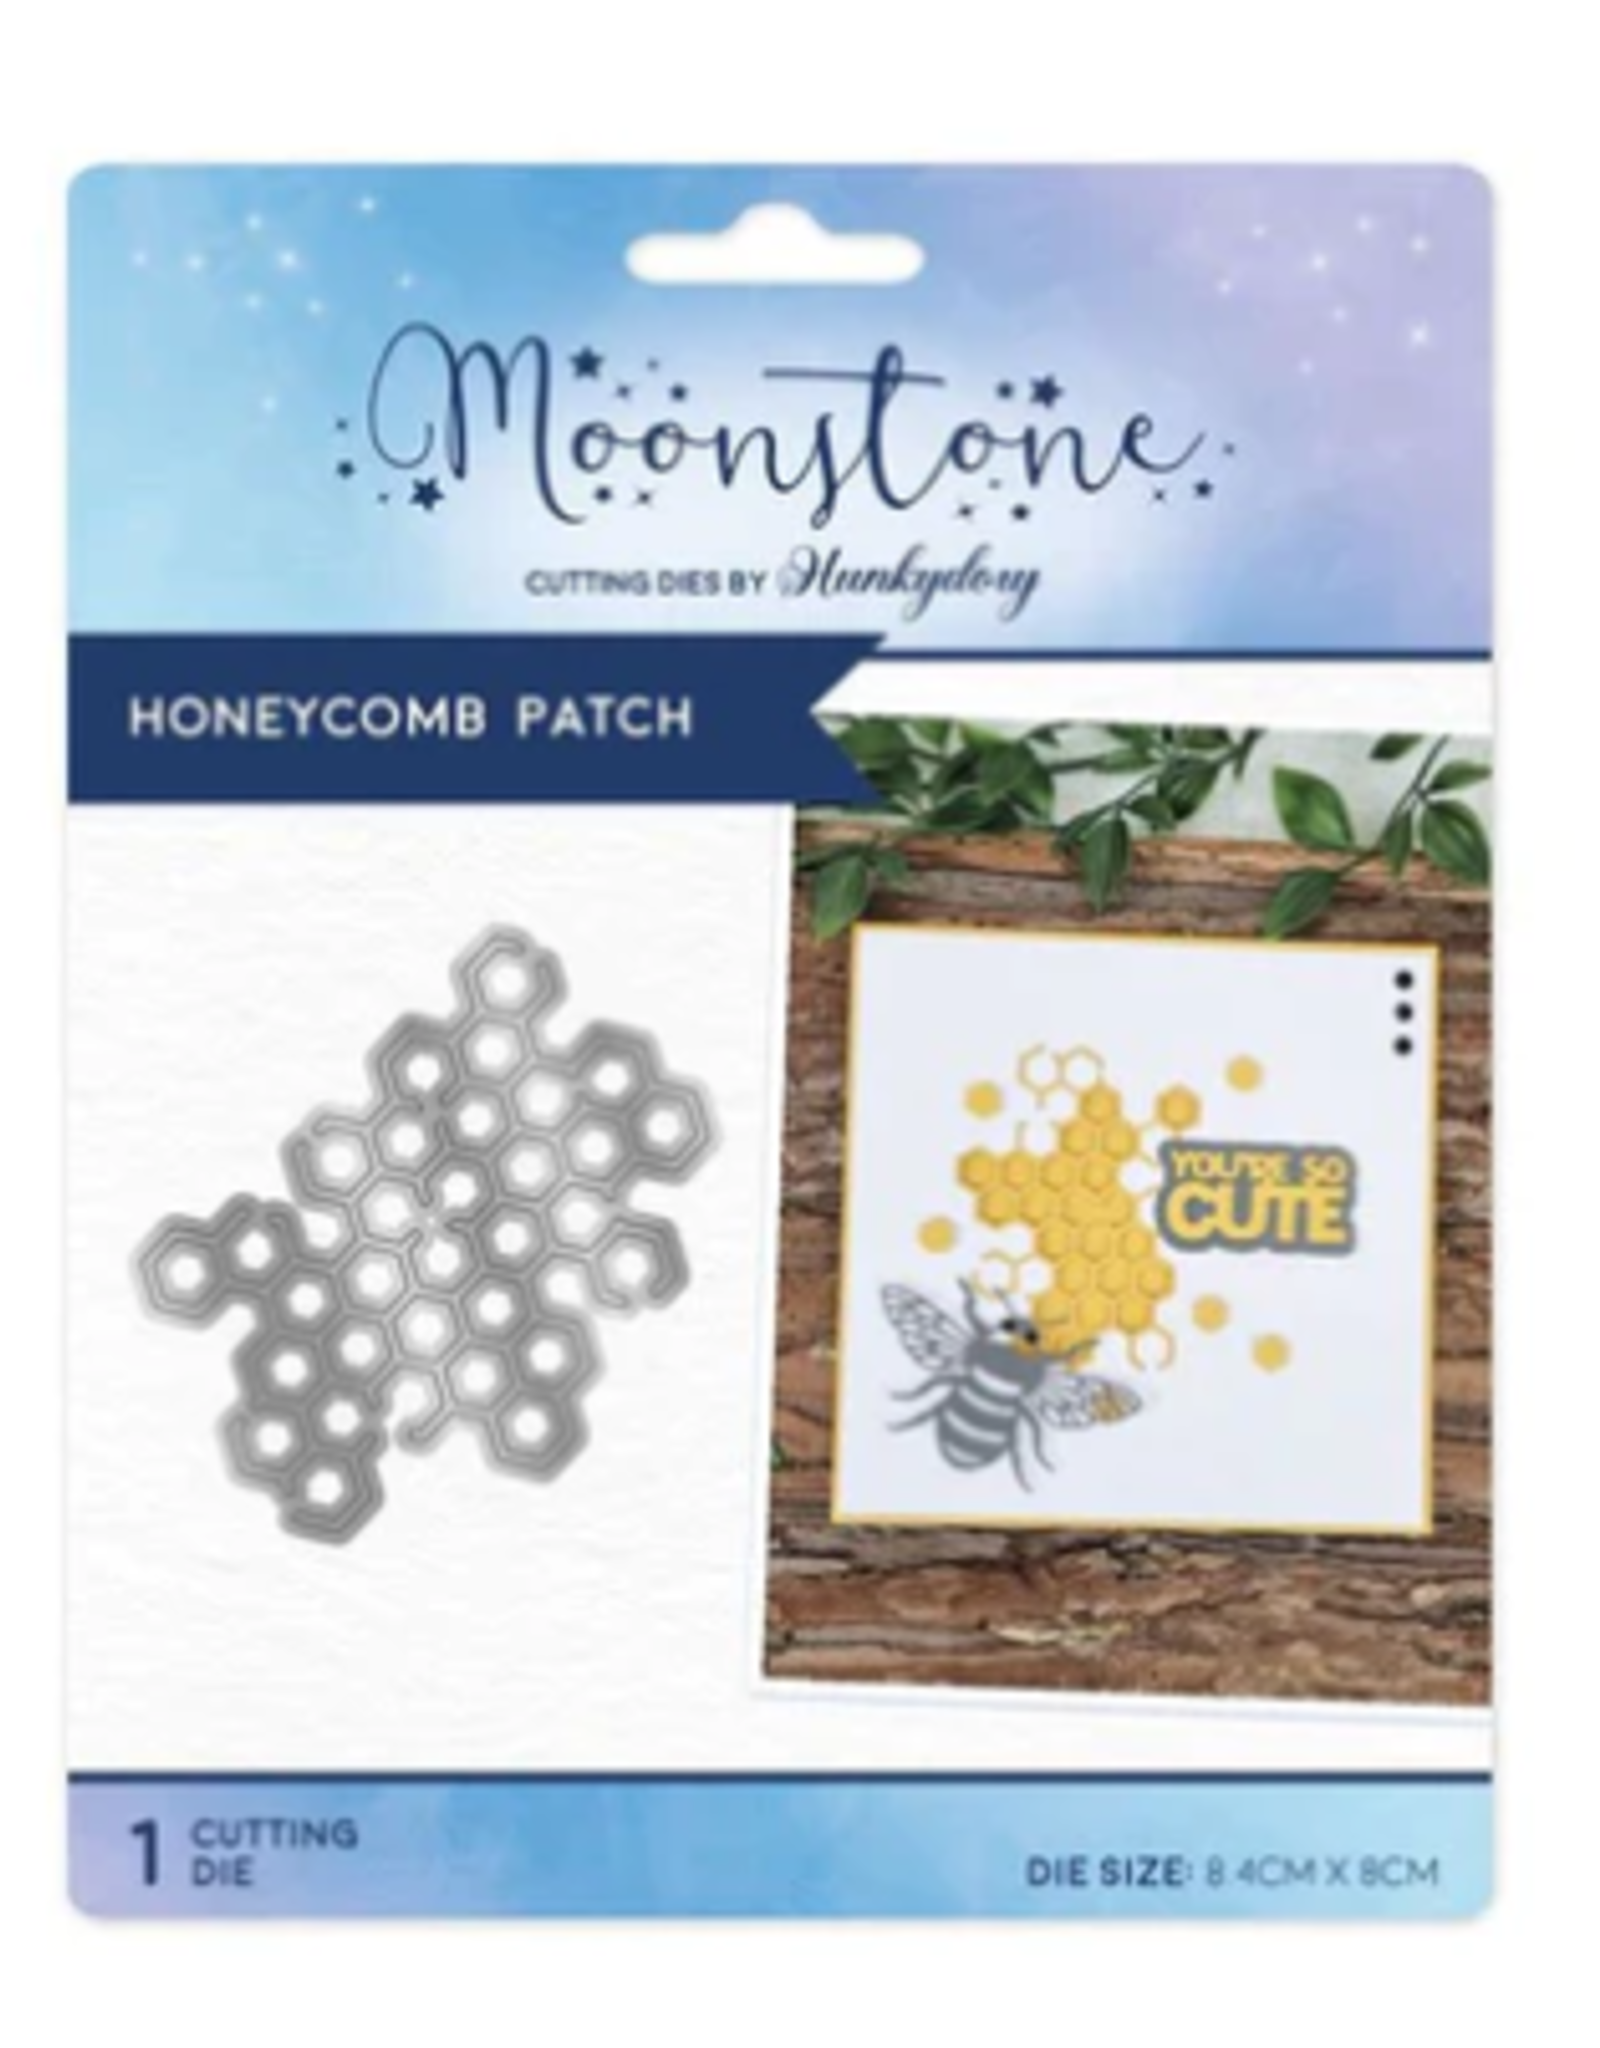 HUNKYDORY CRAFTS LTD. HUNKYDORY MOONSTONE HONEYCOMB PATCH DIE